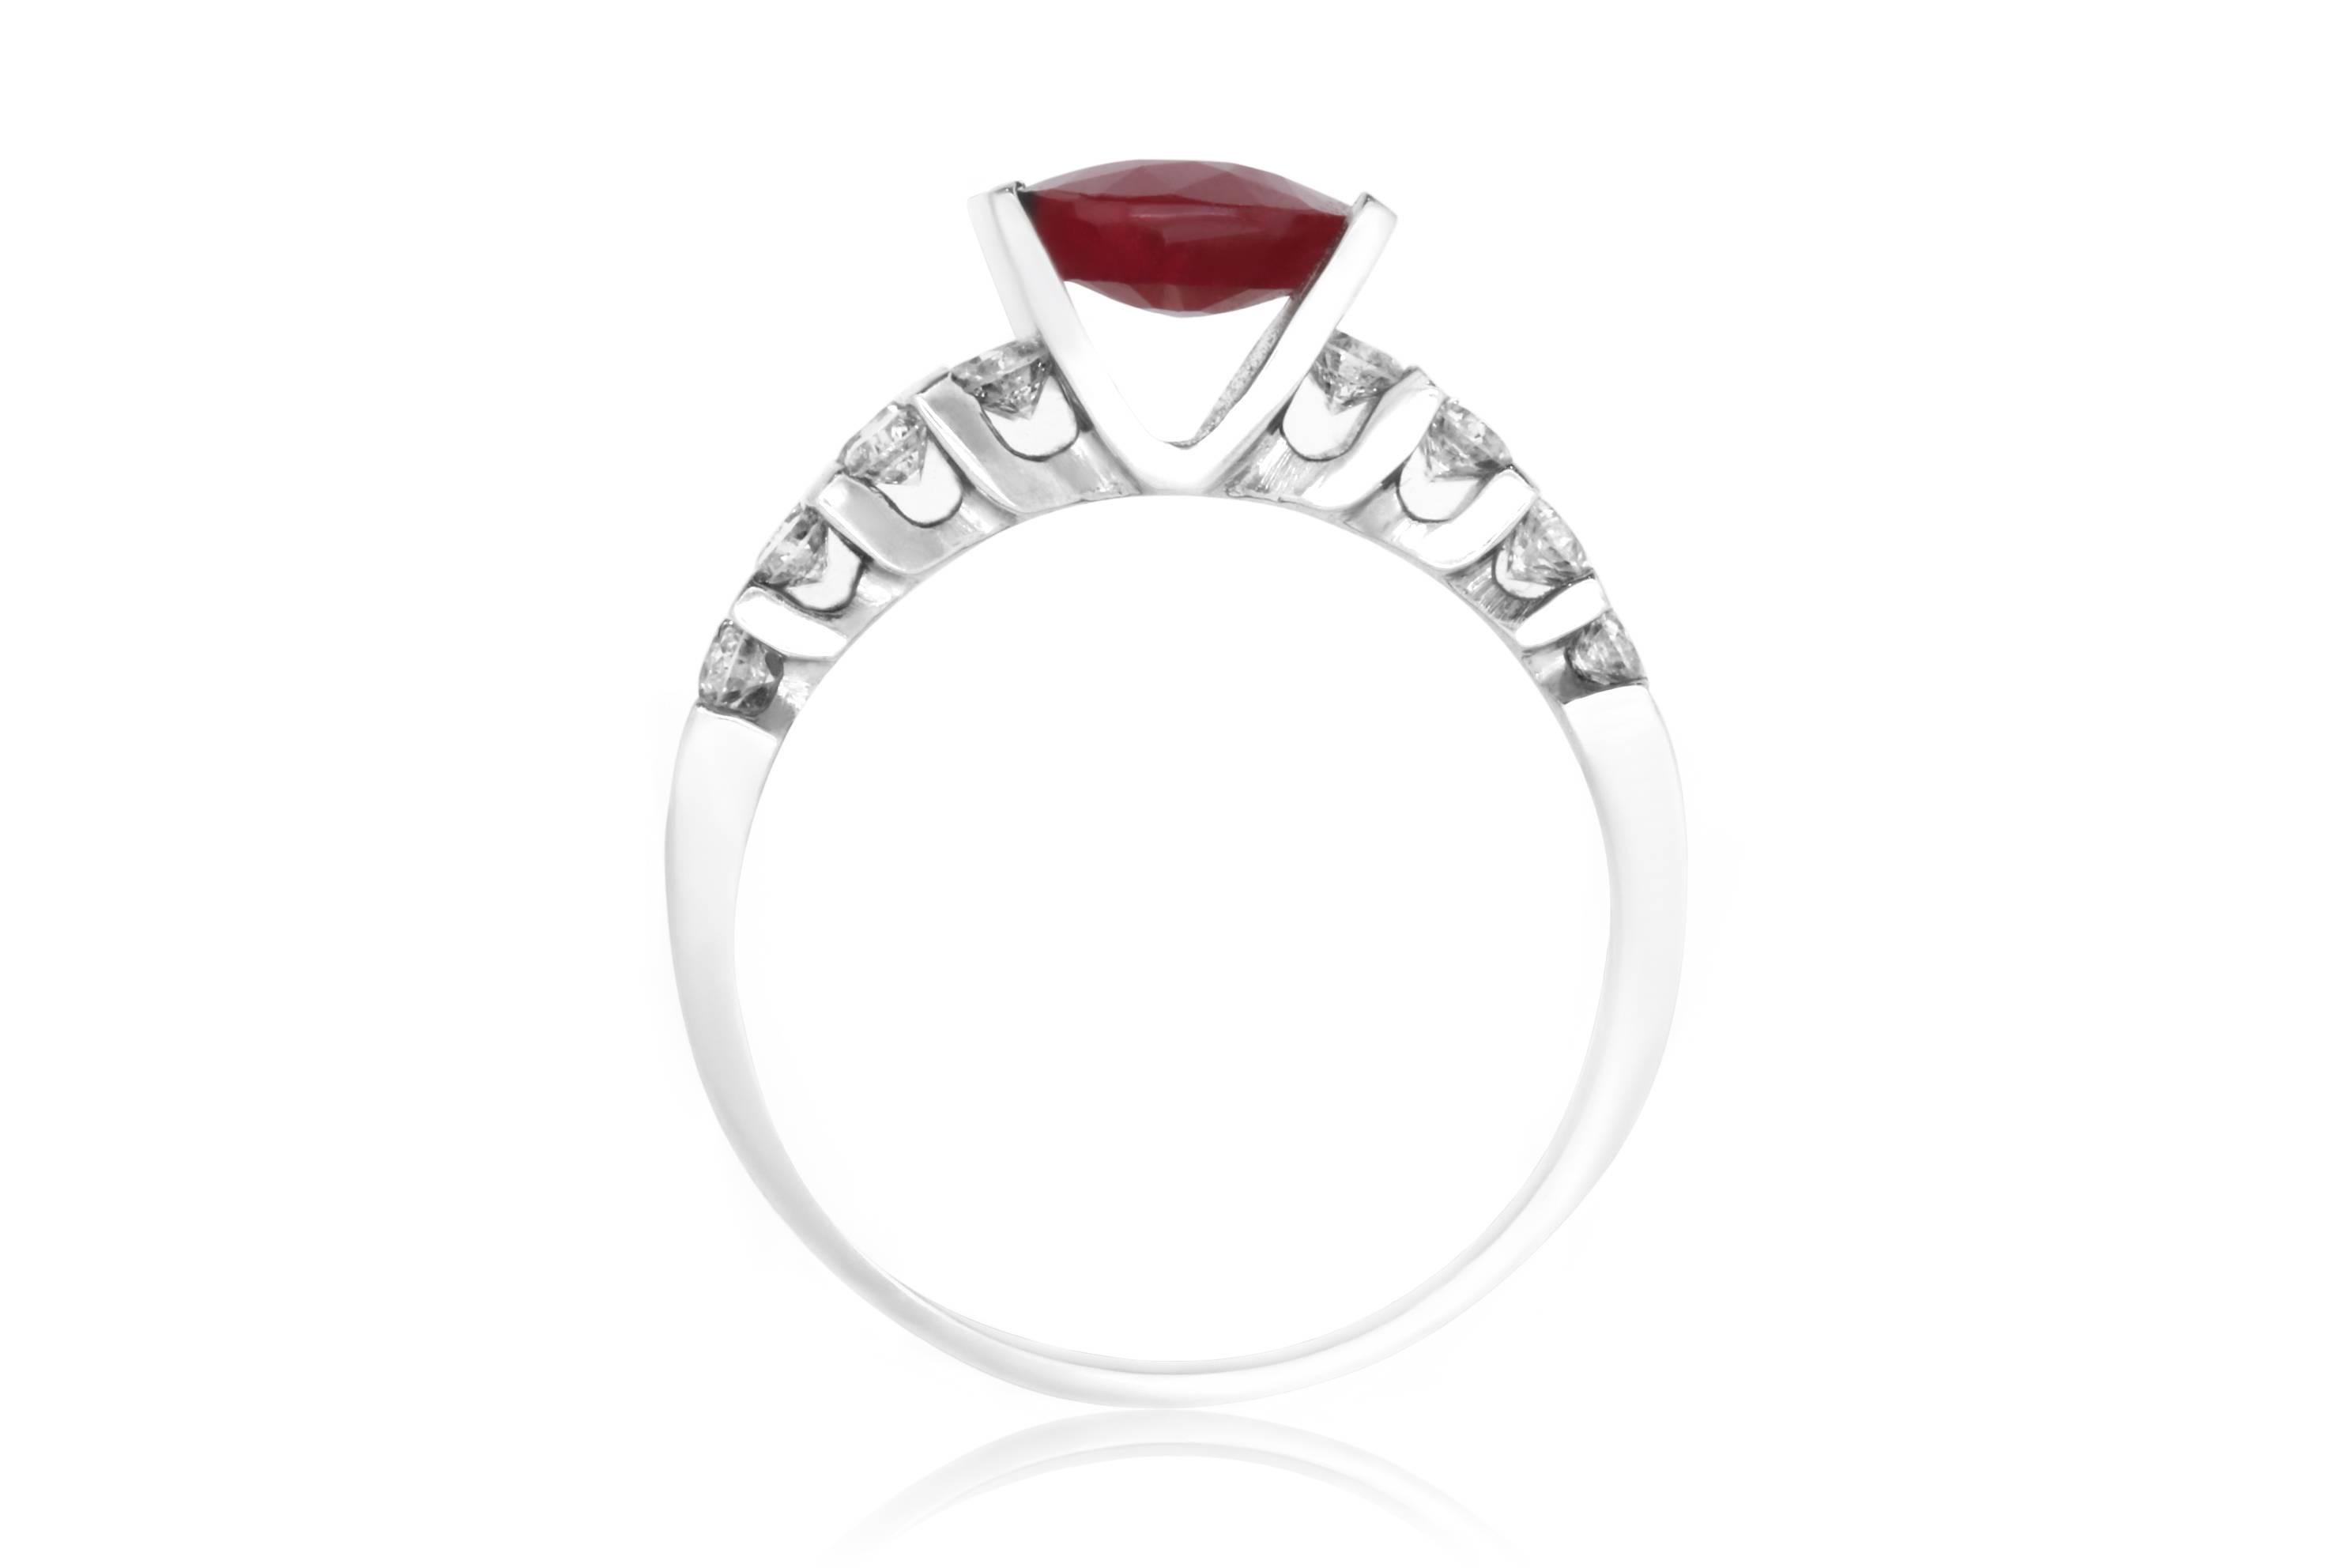 Material: 14k White Gold
Gemstones: 1 Oval Ruby at 1.90 Carats.
Diamonds: 24 Brilliant Round White Diamonds at 0.90 Carats. SI Clarity / H-I Color. 
Ring Size: 5.75. Alberto offers complimentary sizing on all rings.

Fine one-of-a kind craftsmanship